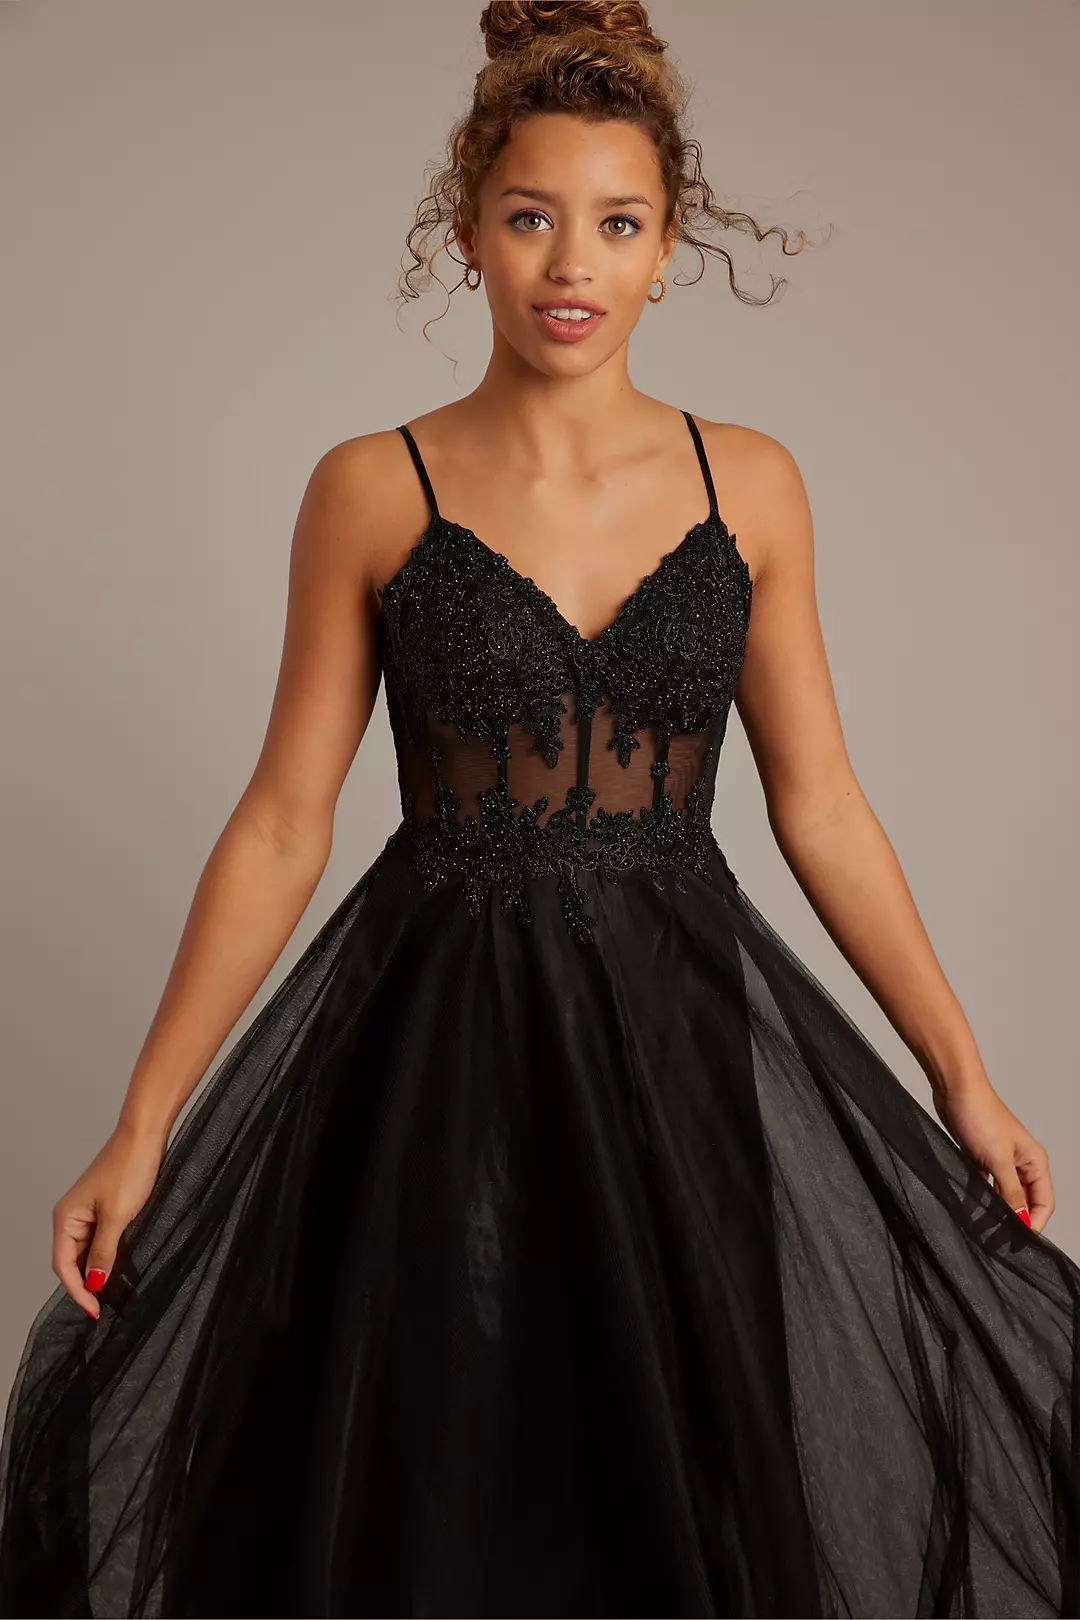 cuz life's too short to love you only in one. This maxi dress has a  romantic tulle construction, an unboned satin bodice, a detachable lace underbust  corset wit…